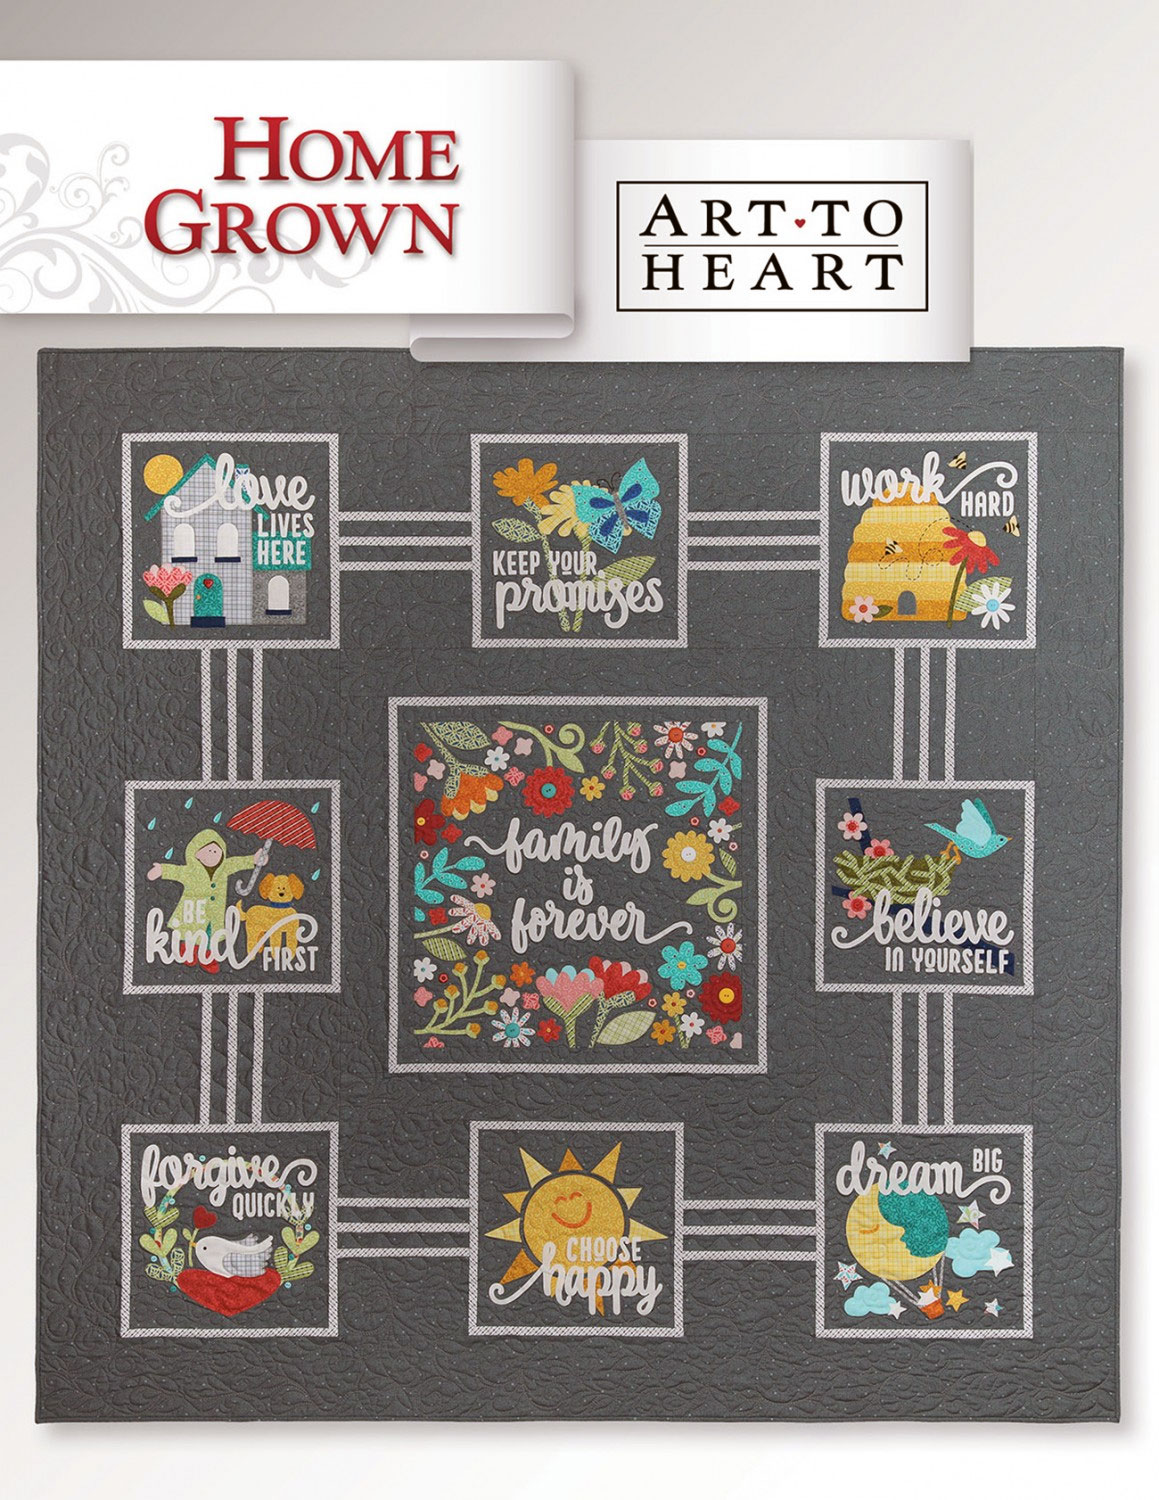 Home-Grown-sewing-pattern-book-Art-To-Heart-front